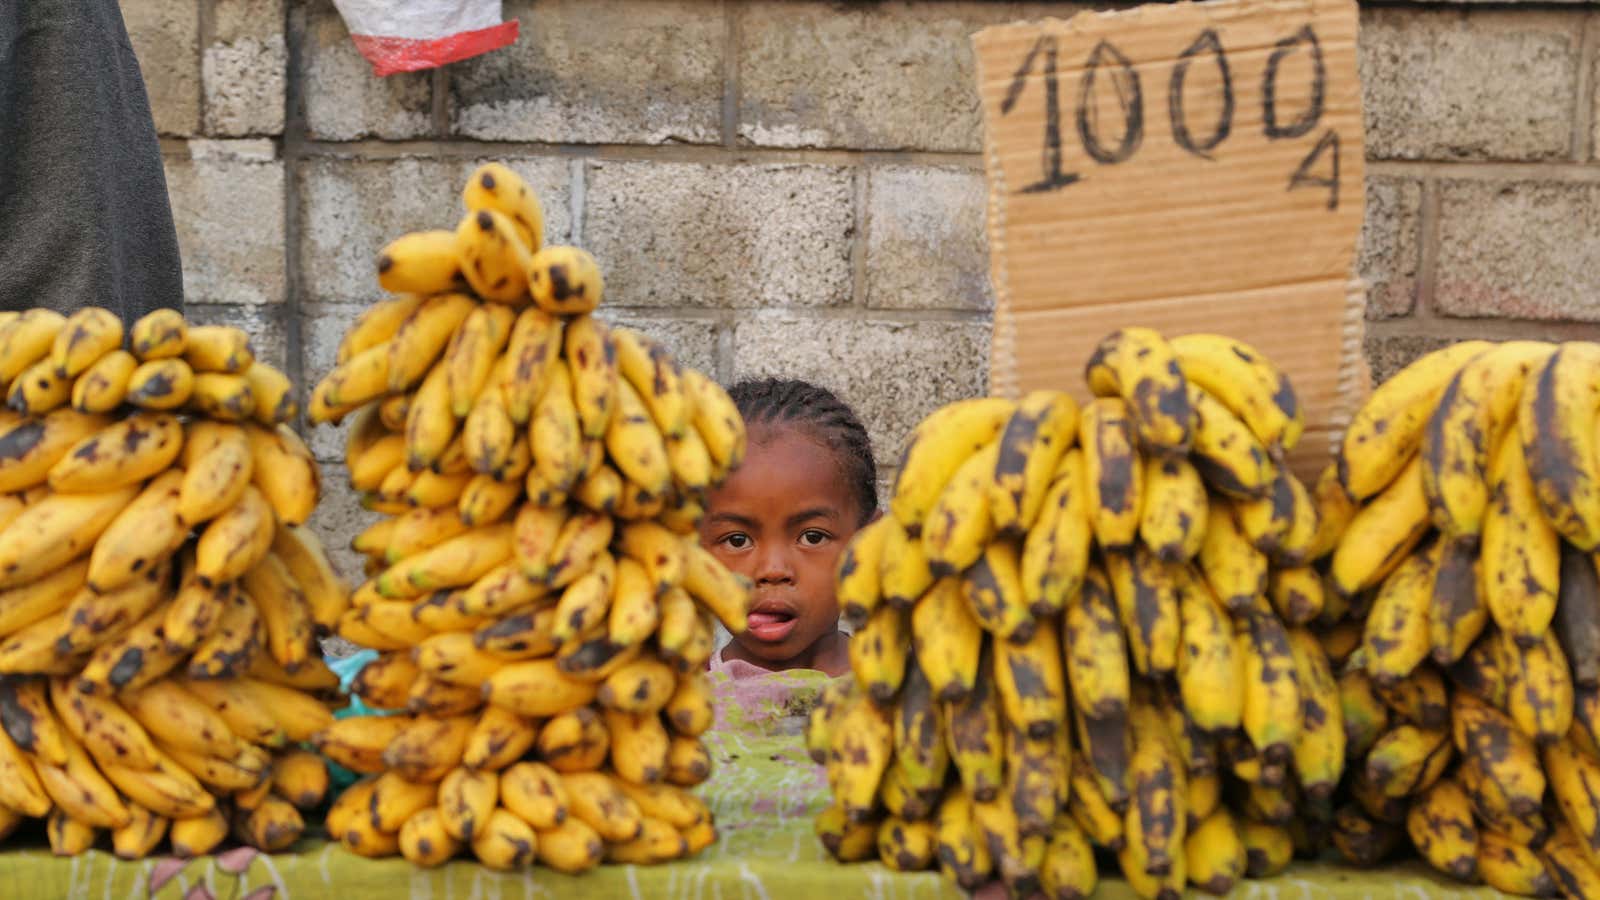 These Madagascar bananas could be next.